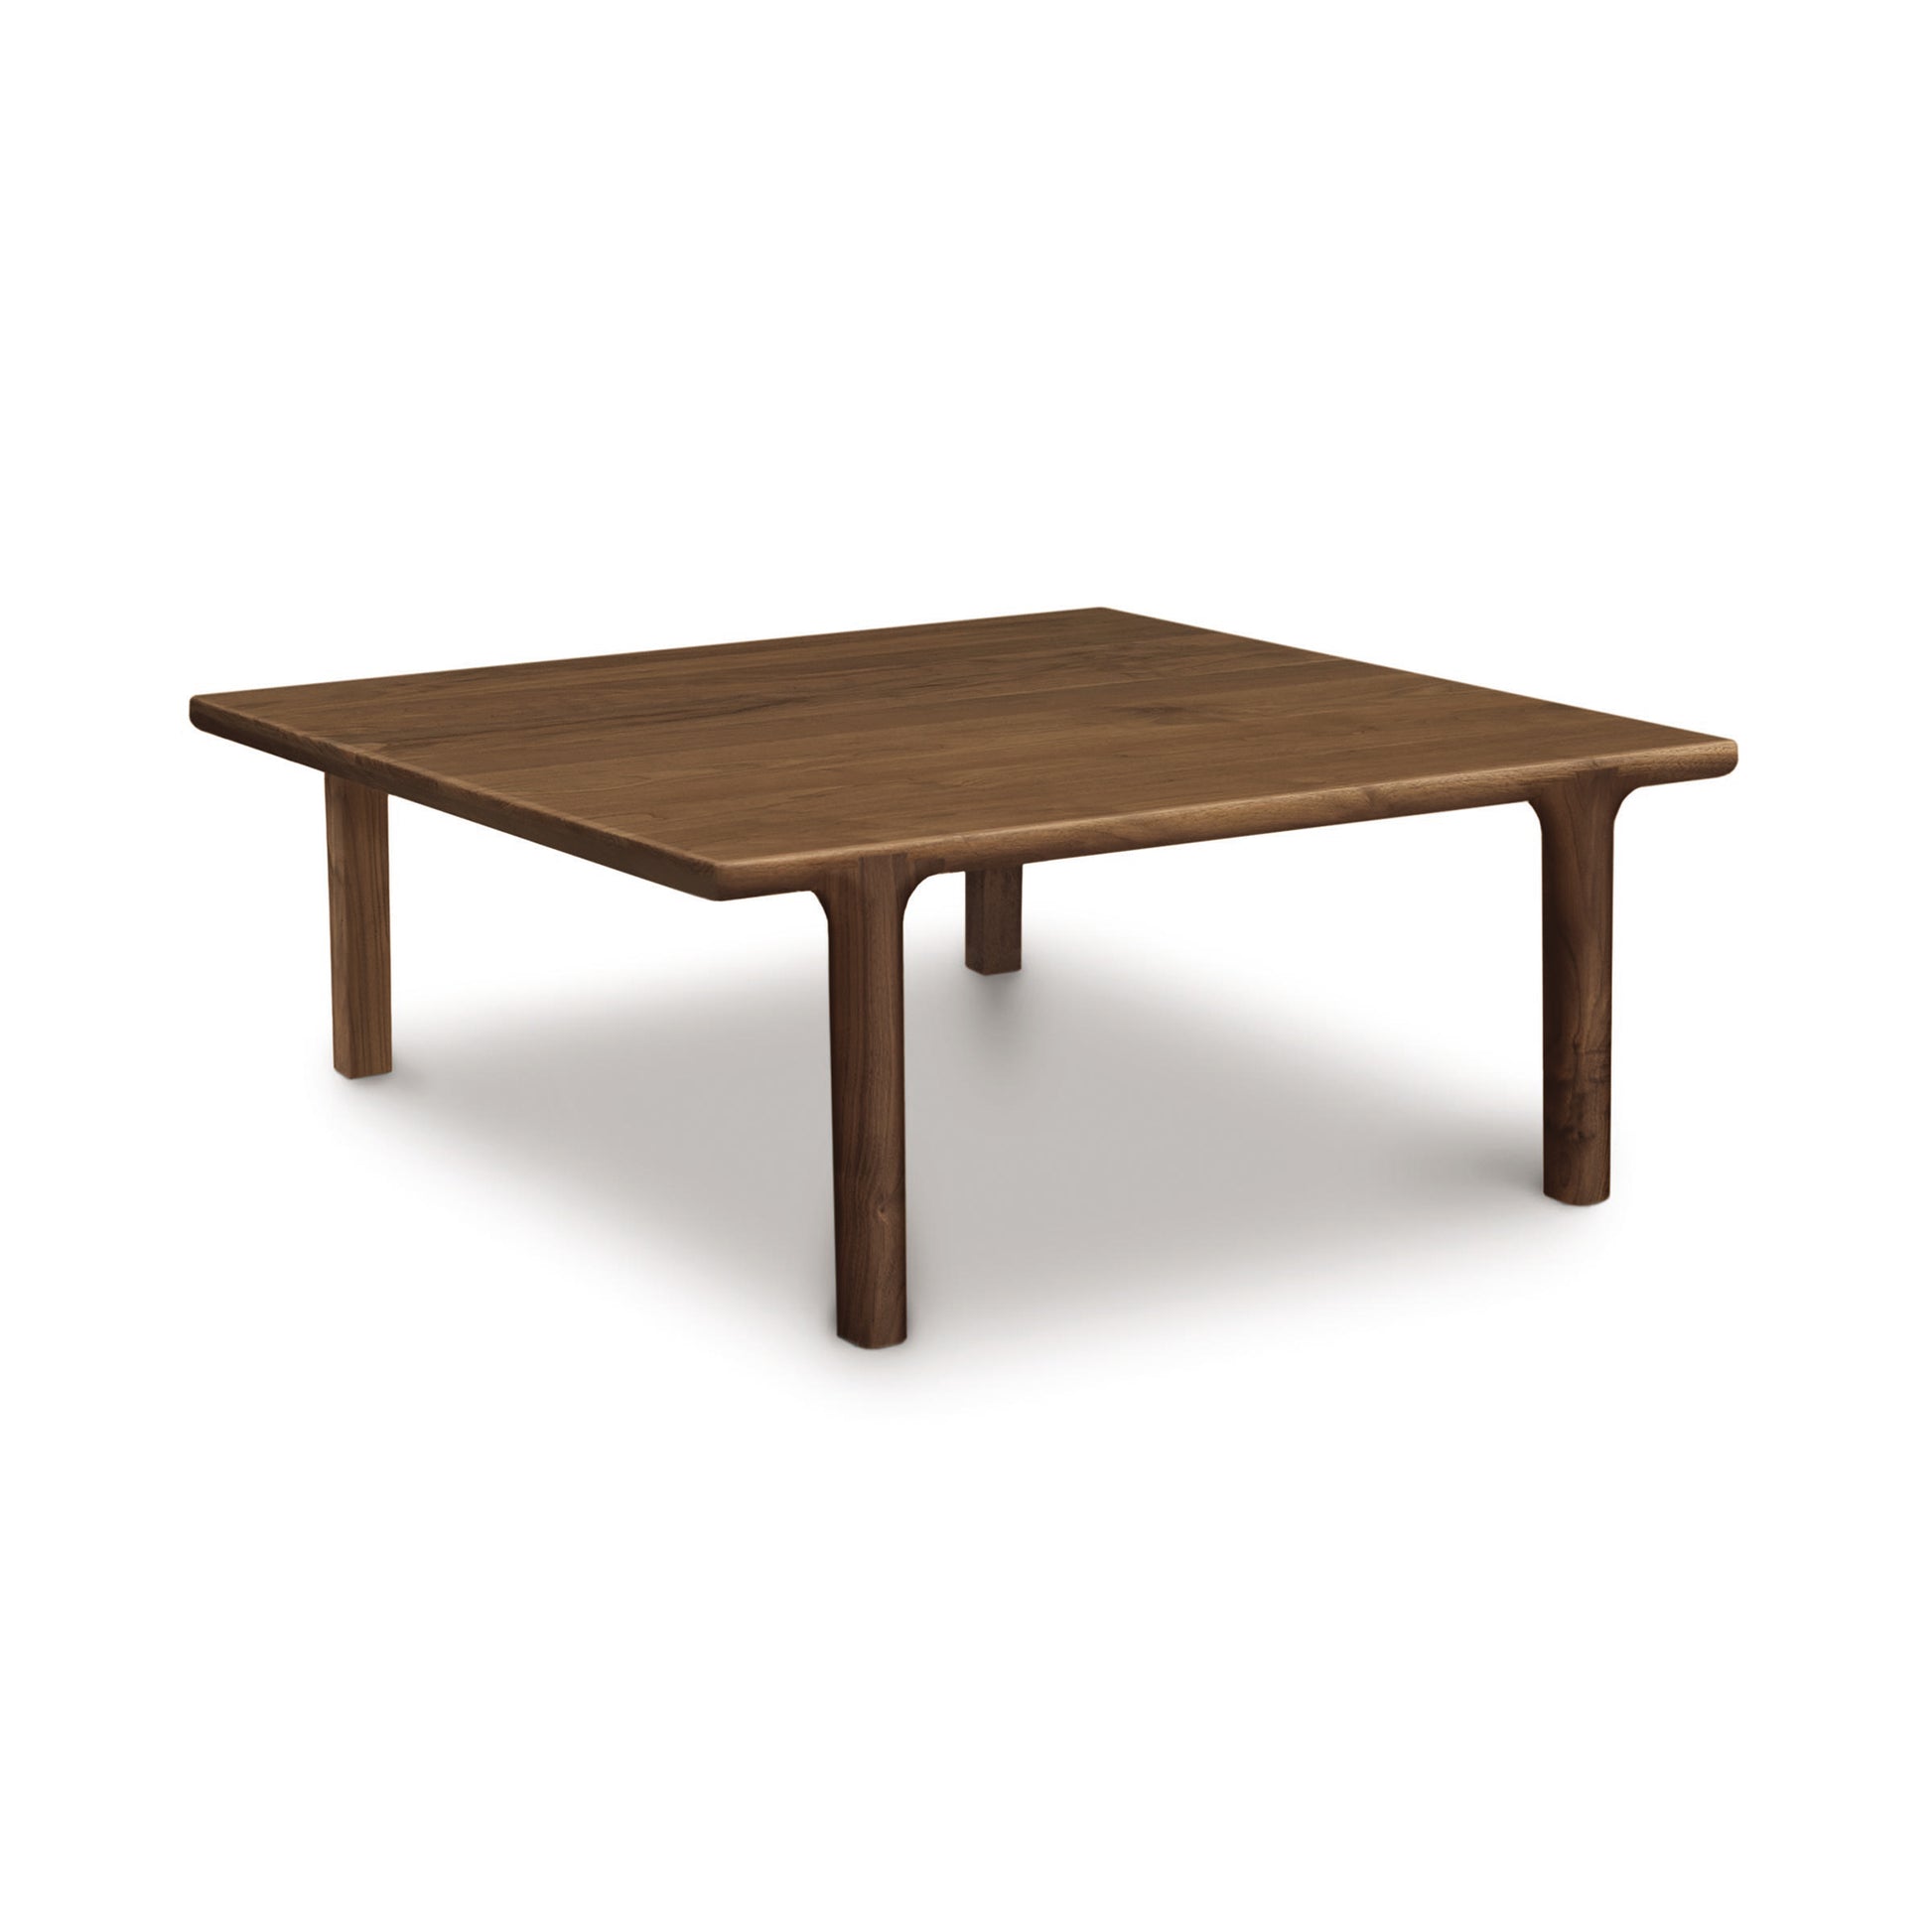 A Copeland Furniture Sierra Square Coffee Table with four legs, isolated on a white background.